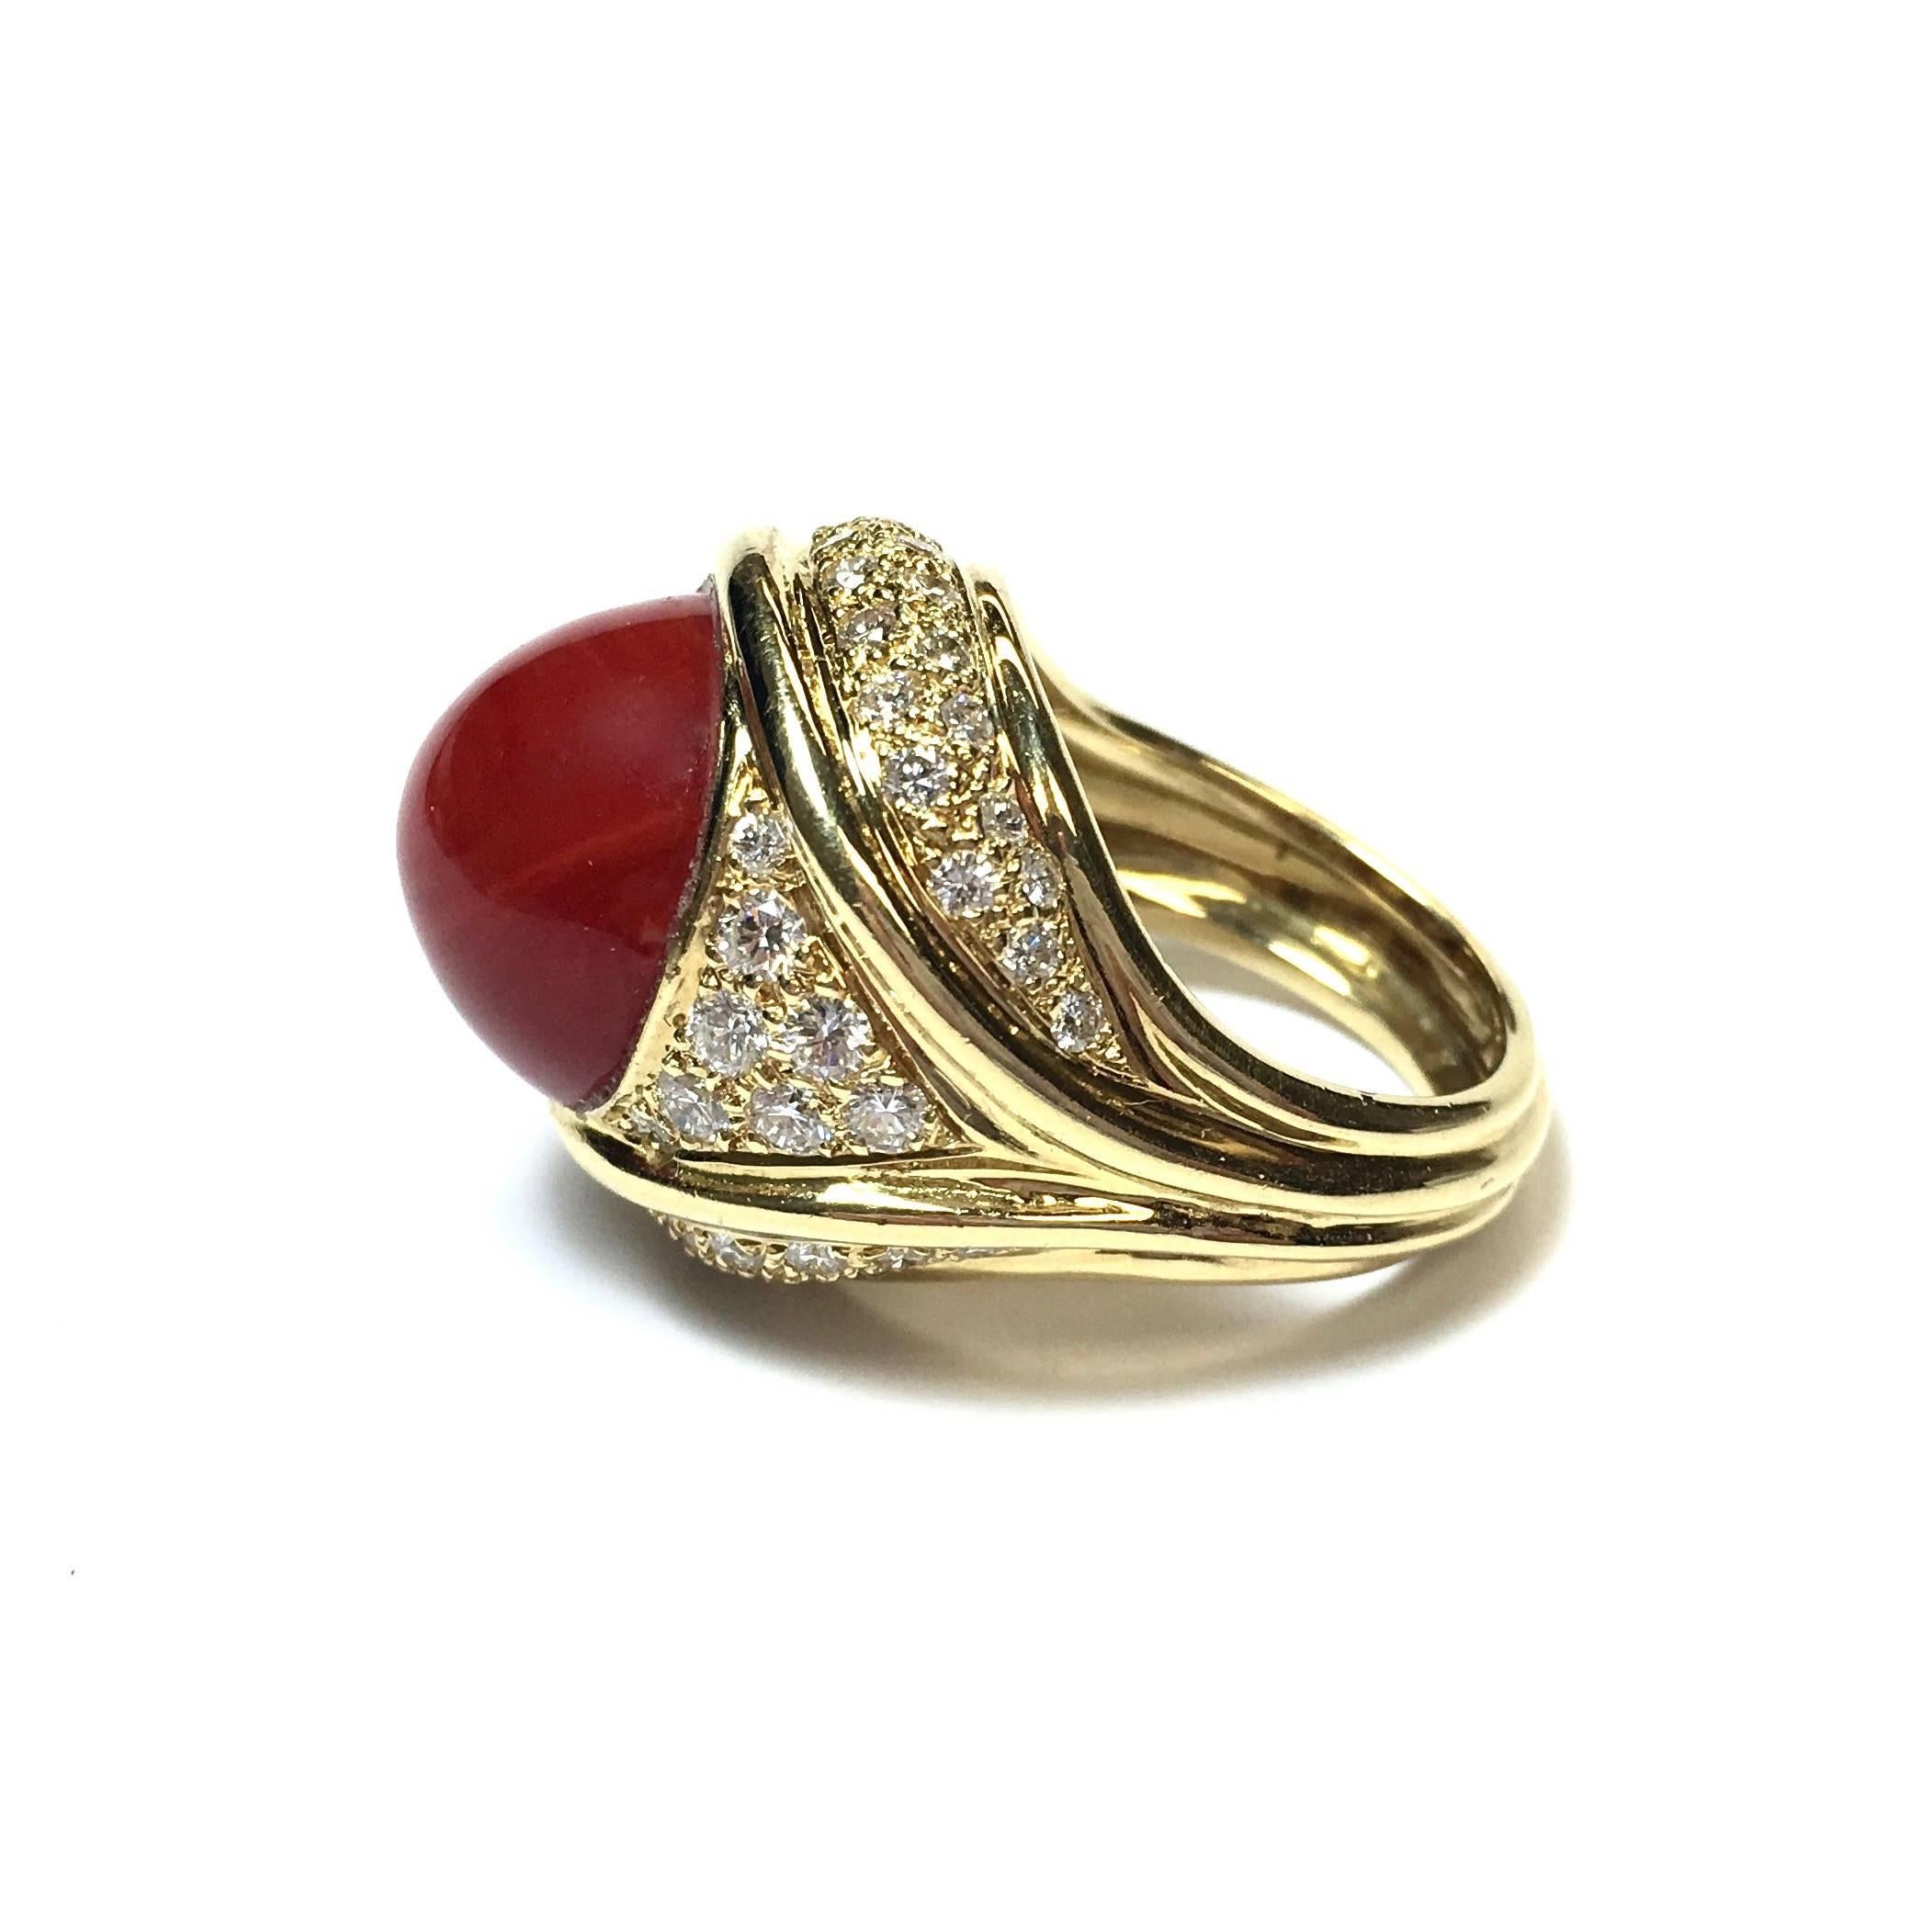 Crafted from 18K yellow gold, featuring a 15 mm coral on the from, set within a gallery of diamonds, supported by a 5 mm wide band.
Approximate total diamond weight: 2.25 carats, Color: F-G, Clarity: VS
Size: 7.5 (Sizable)
Weight: 21.5 grams